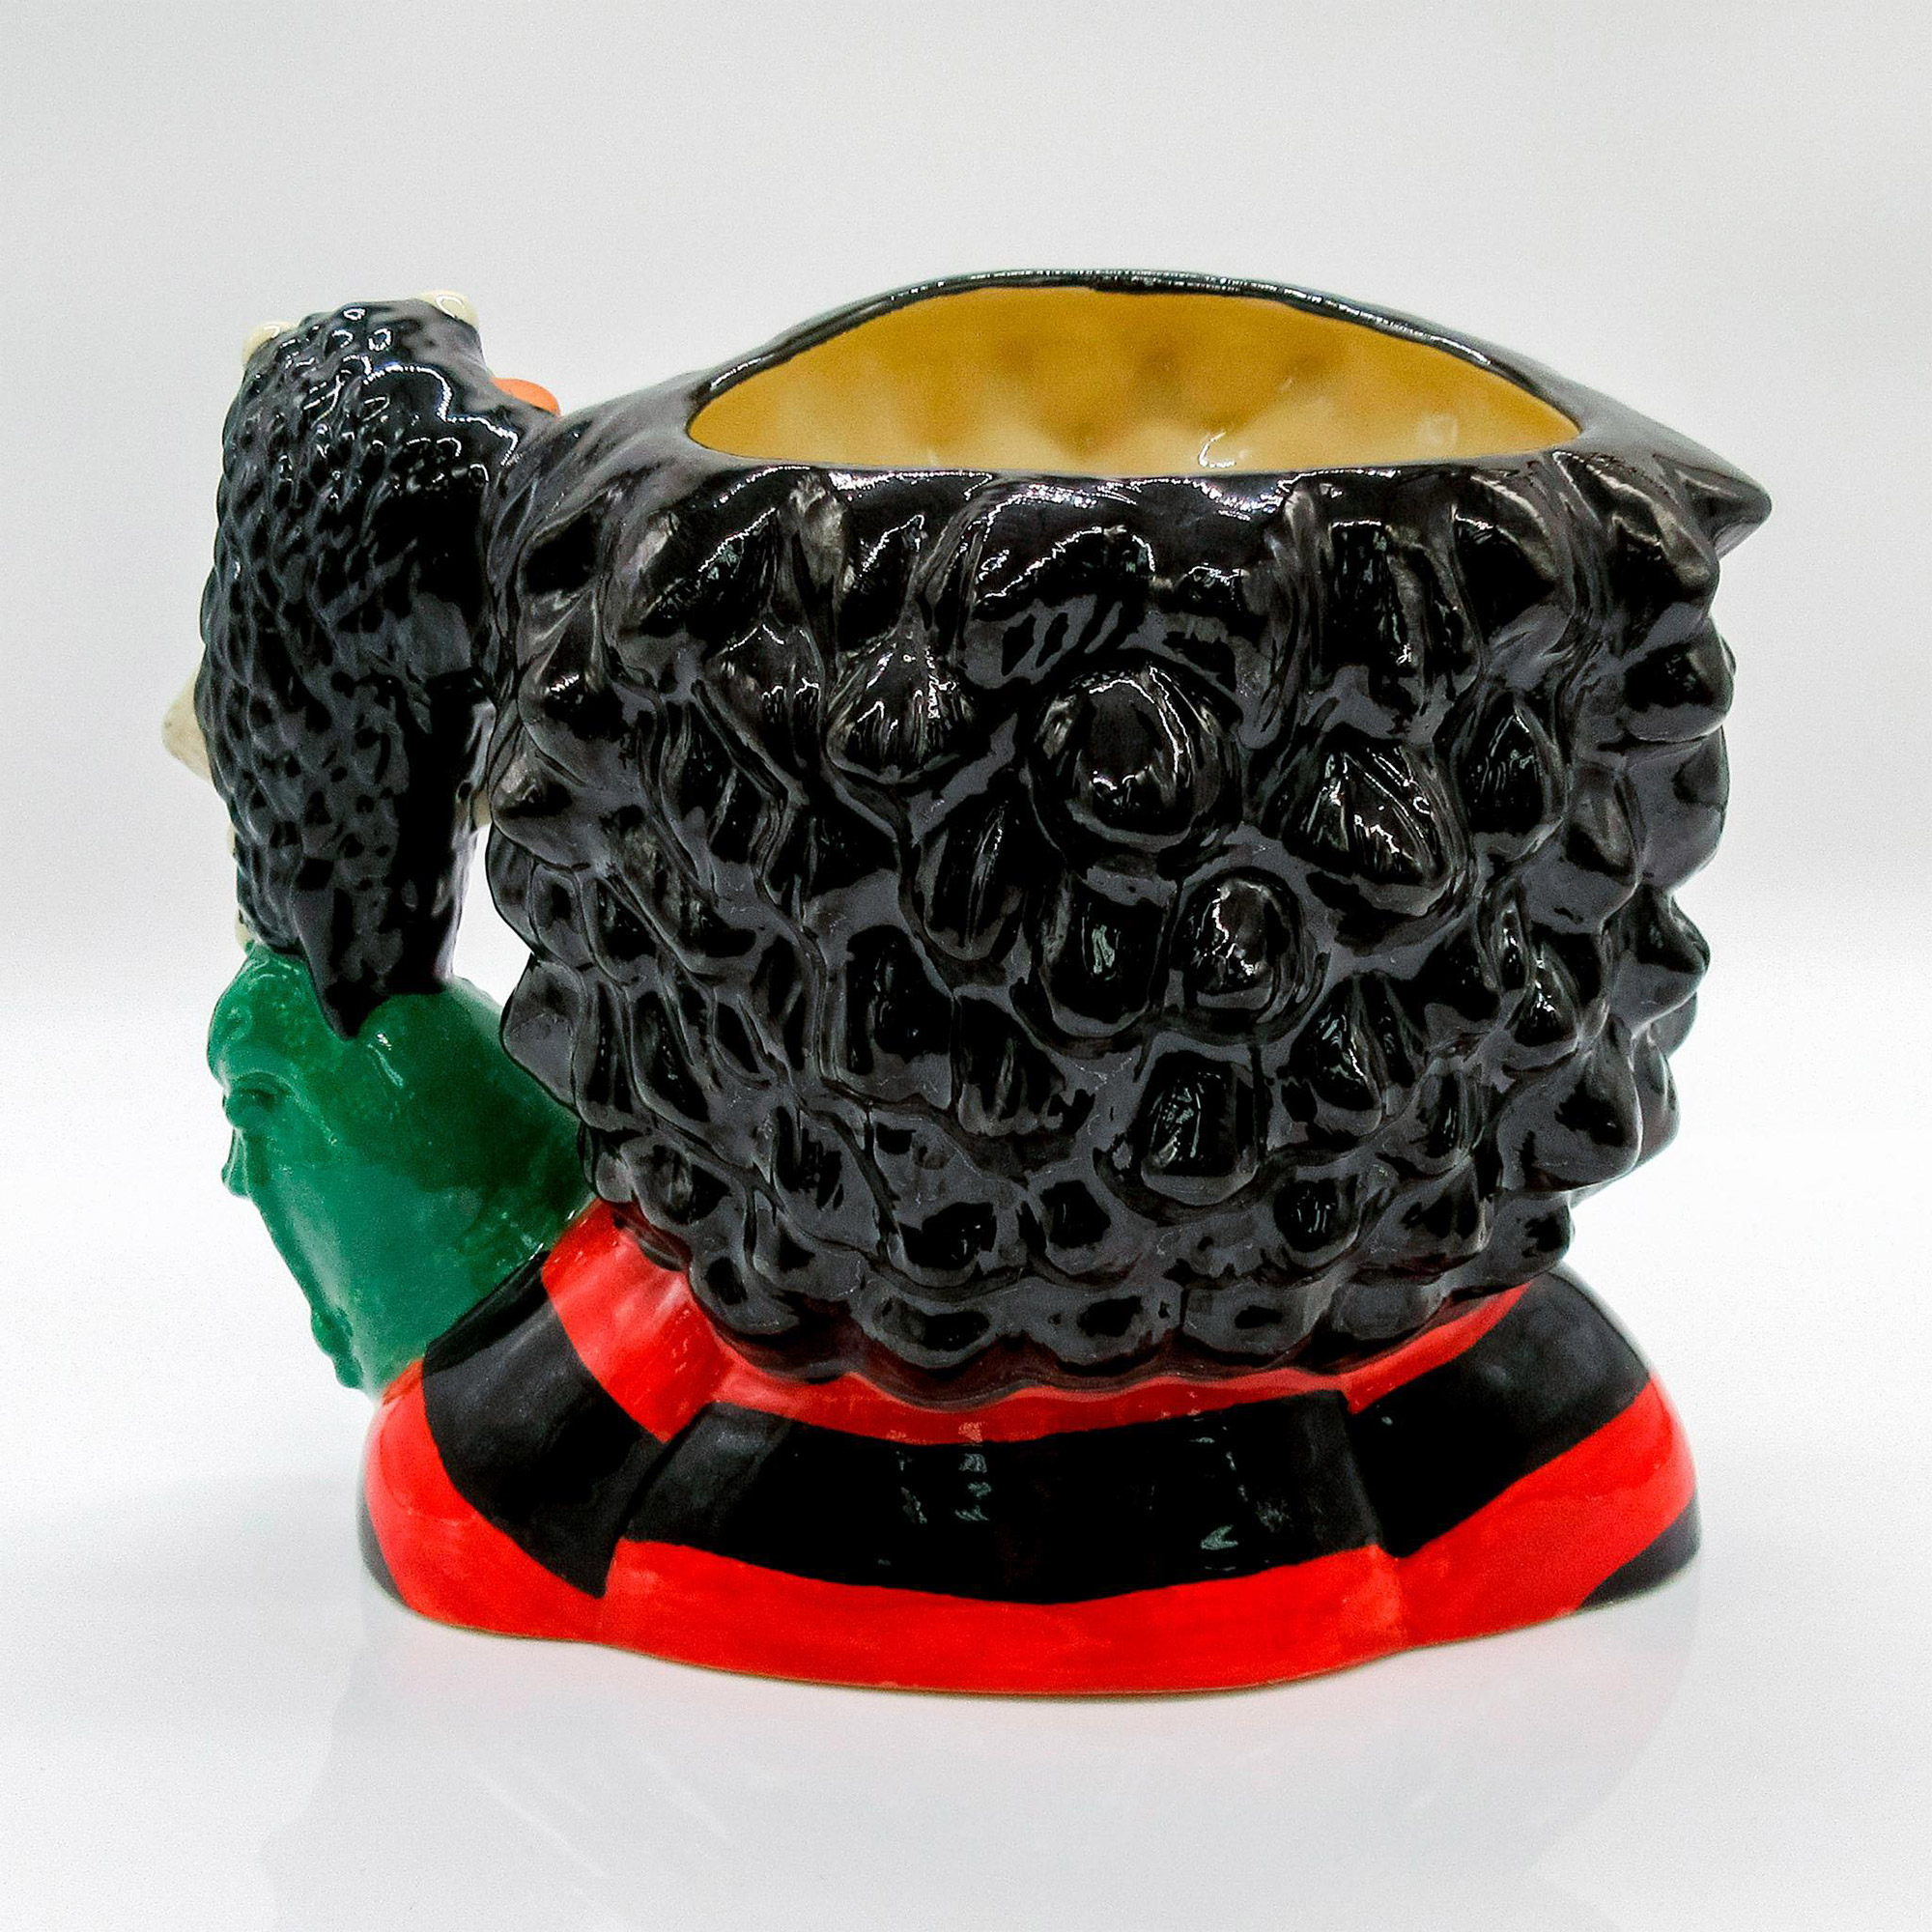 Dennis and Gnasher D7005 - Large - Royal Doulton Character Jug - Image 3 of 5